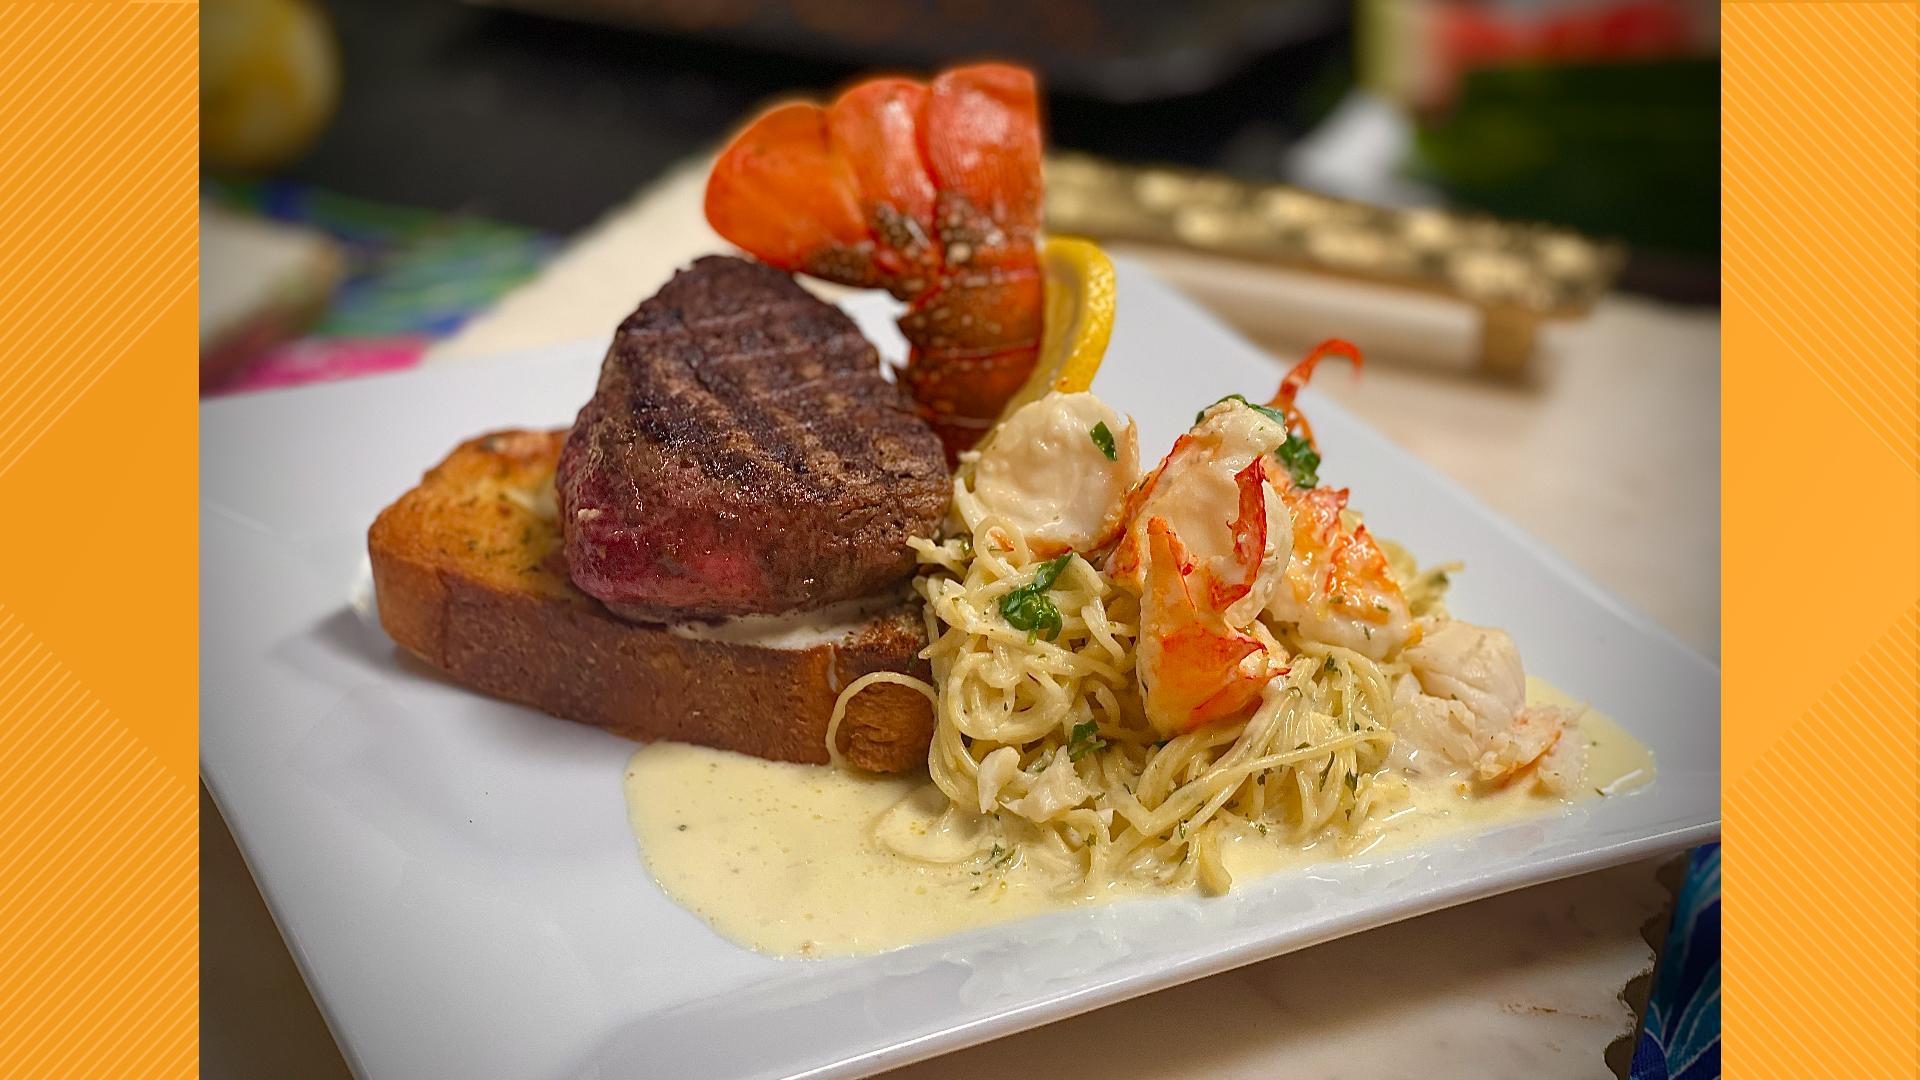 This classic meal features fire-grilled fillet mignon and lobster tail and is elevated with angel hair pasta in a lemon champagne infused cream sauce.